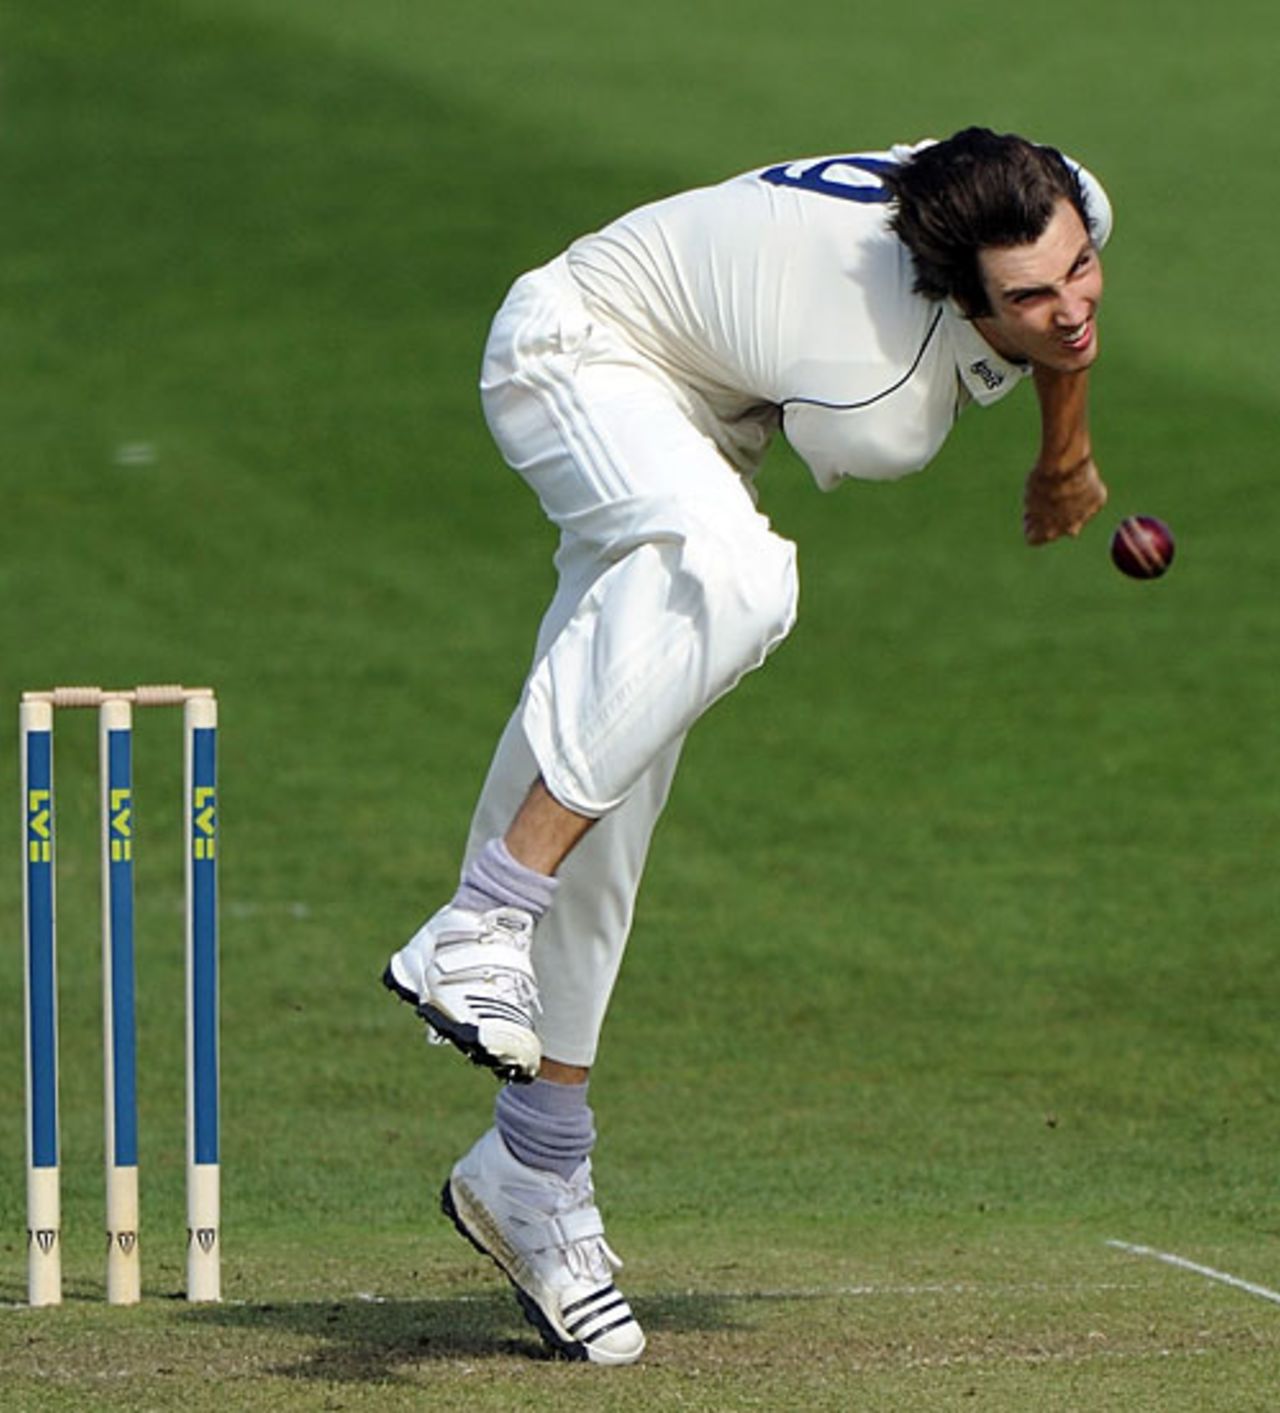 Steven Finn bends his back with the new ball for Middlesex, Worcestershire v Middlesex, County Championship Division Two, New Road, April 9, 2010